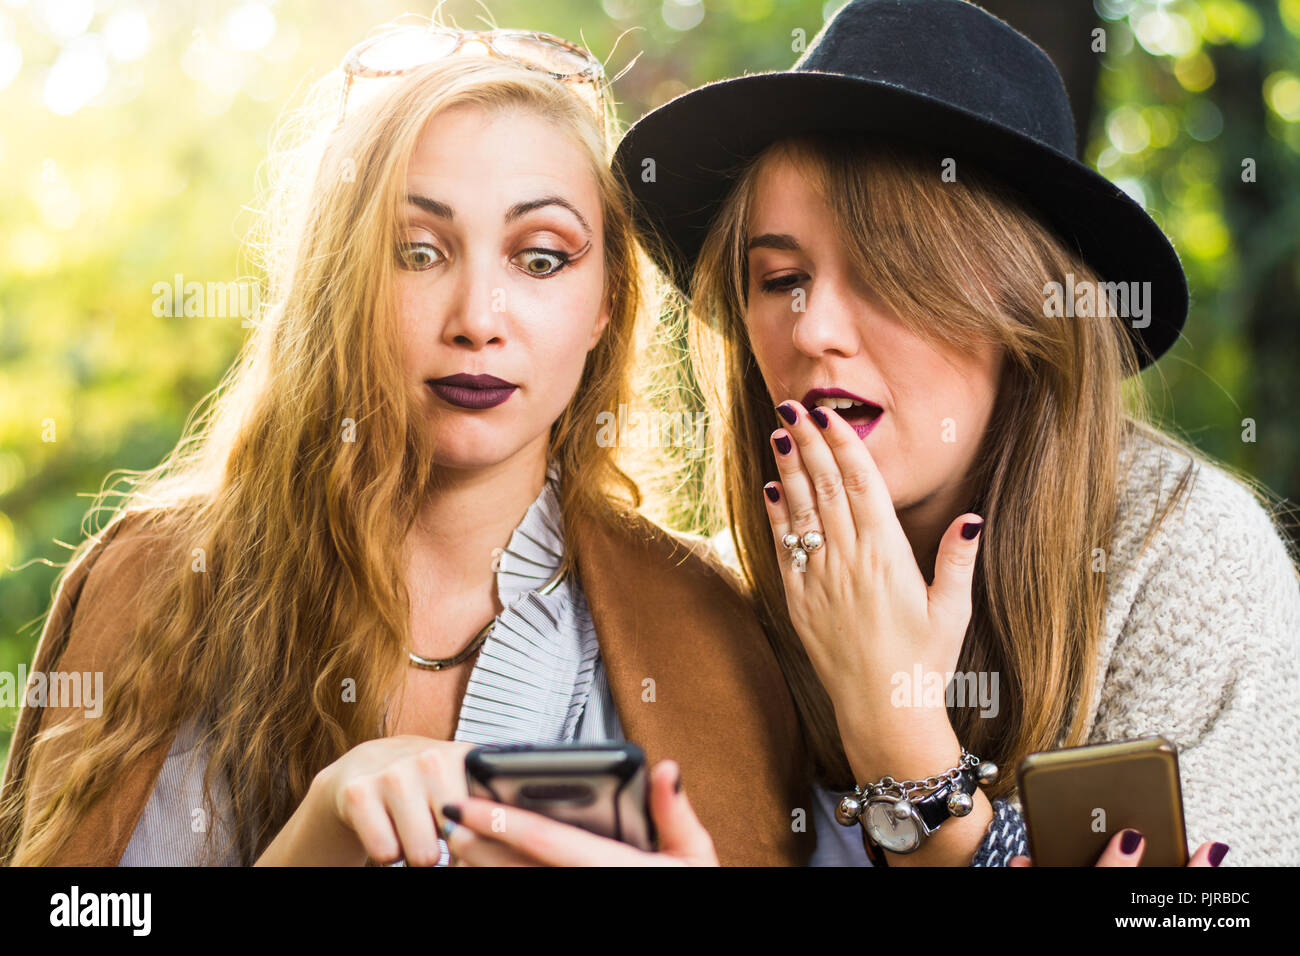 Gossip girl looking at smart phone in the park at sunset Stock Photo